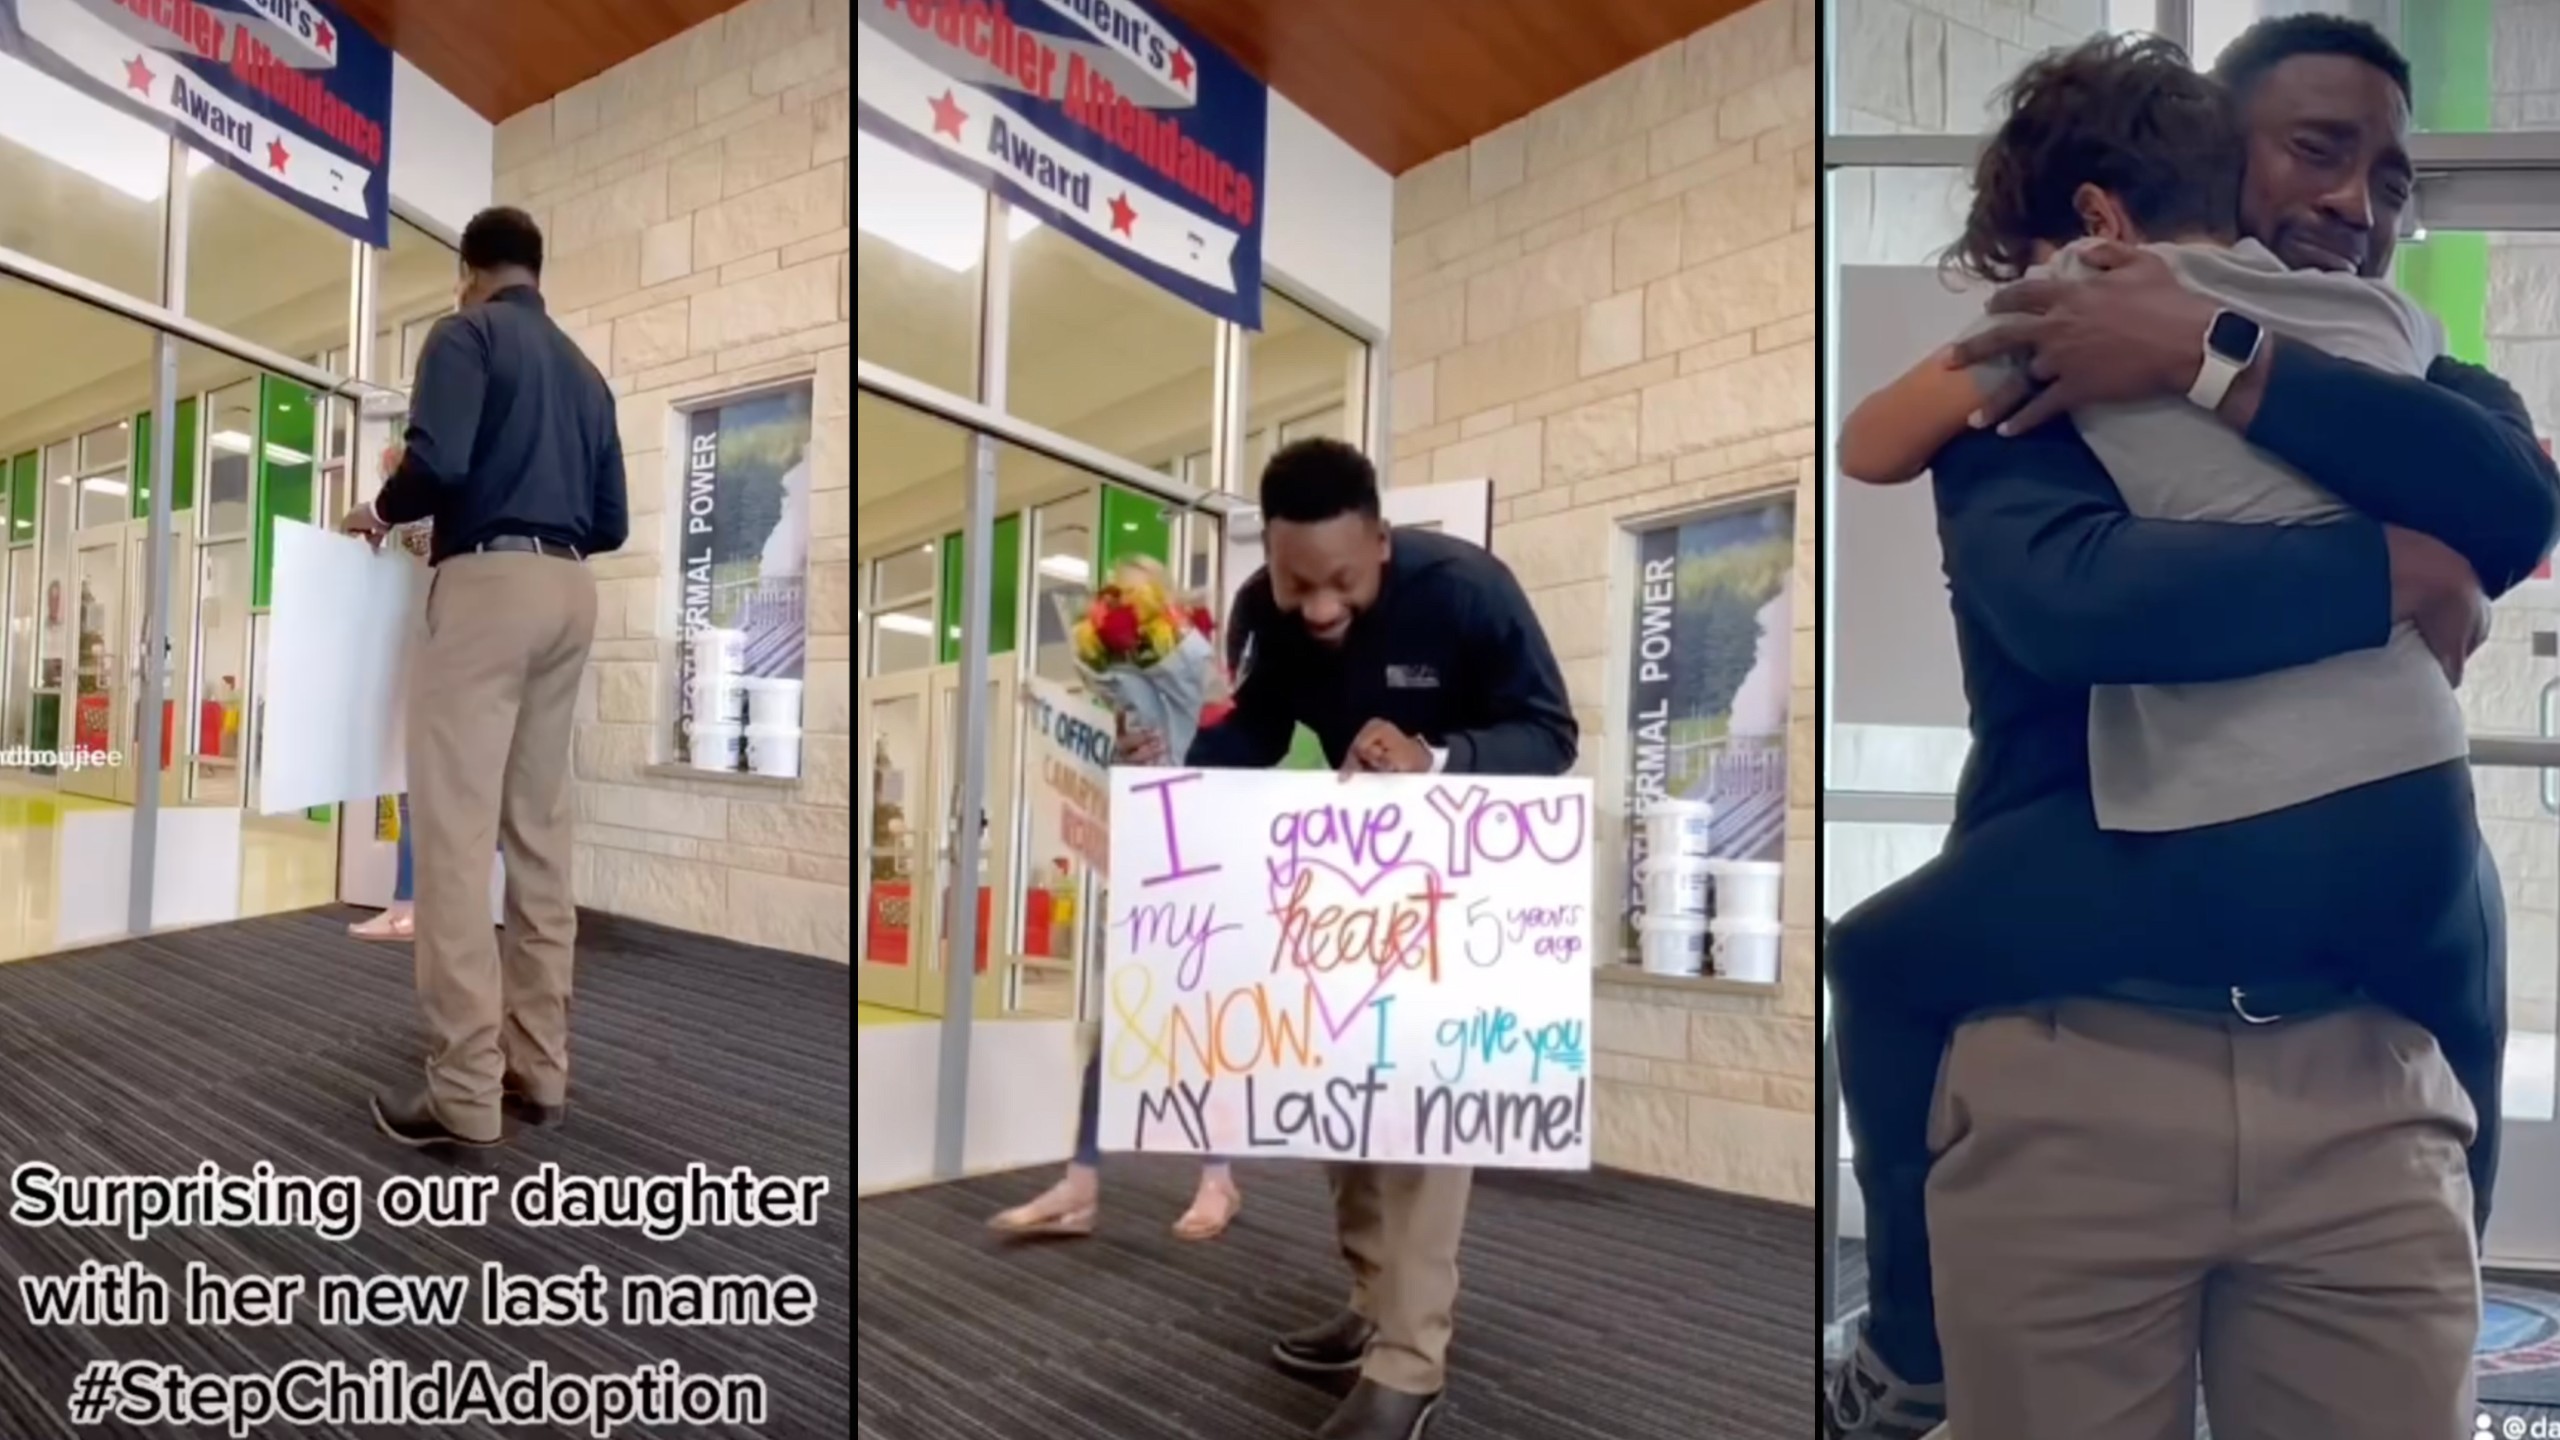 Dad surprises step daughter with new last name